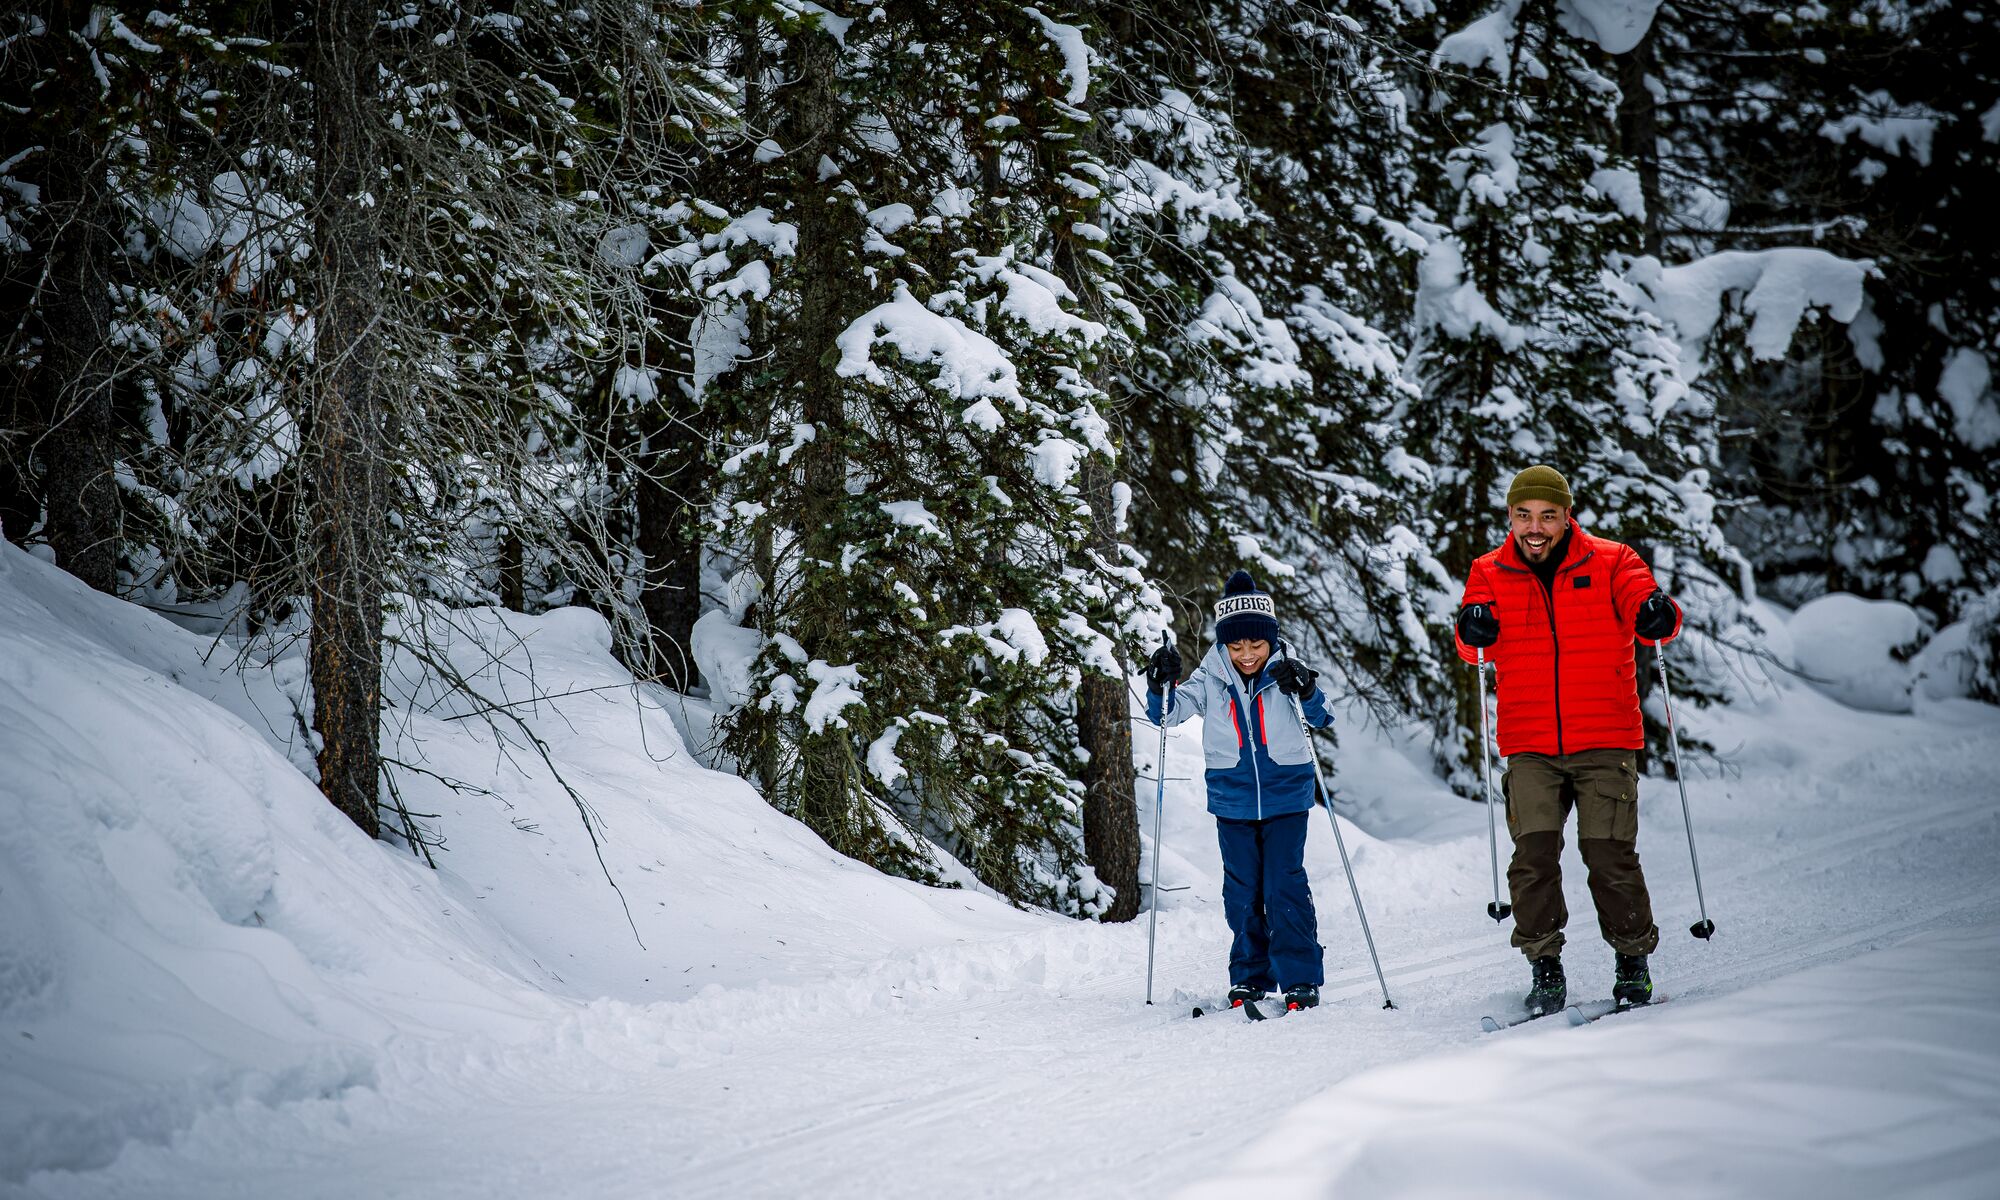 A father and son go cross country skiing on the Moraine Lake Road trails near Lake Louise in Banff National Park.